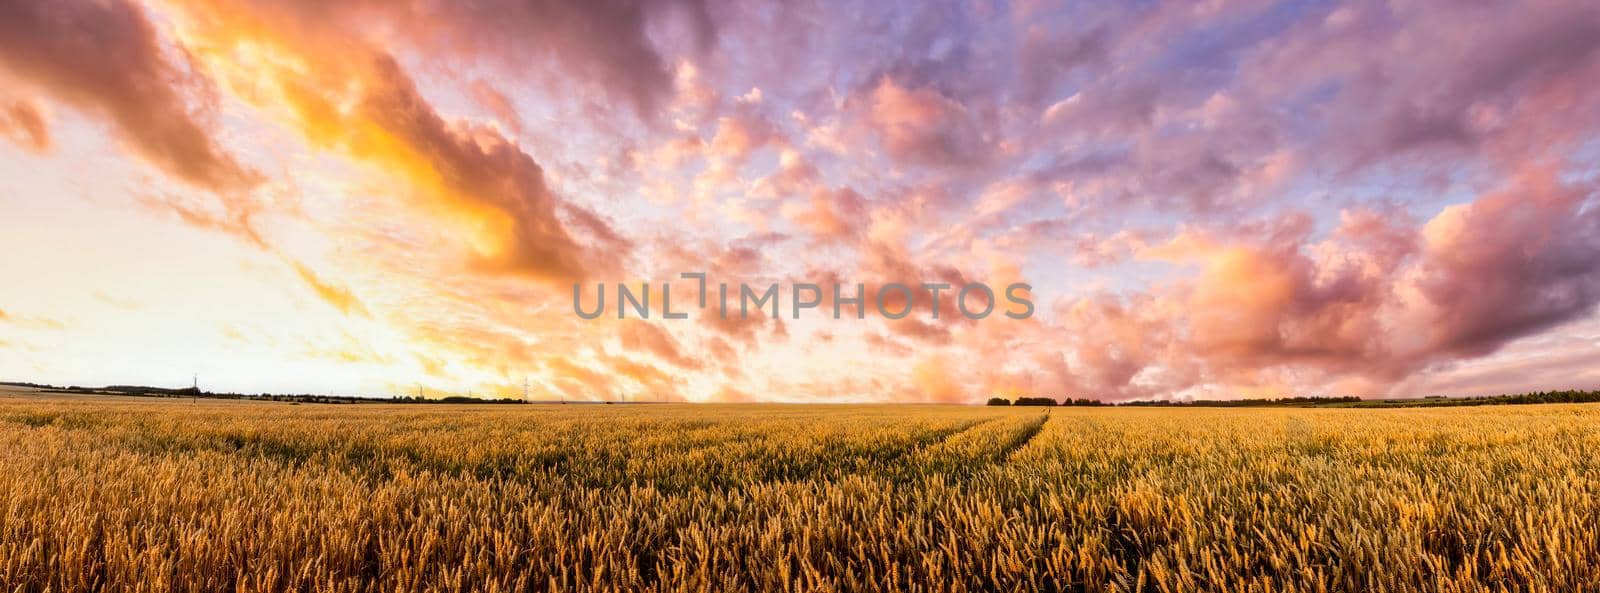 Scene of twilight on the field with young rye or wheat in the summer with a cloudy sky background. Overcast weather. Landscape.